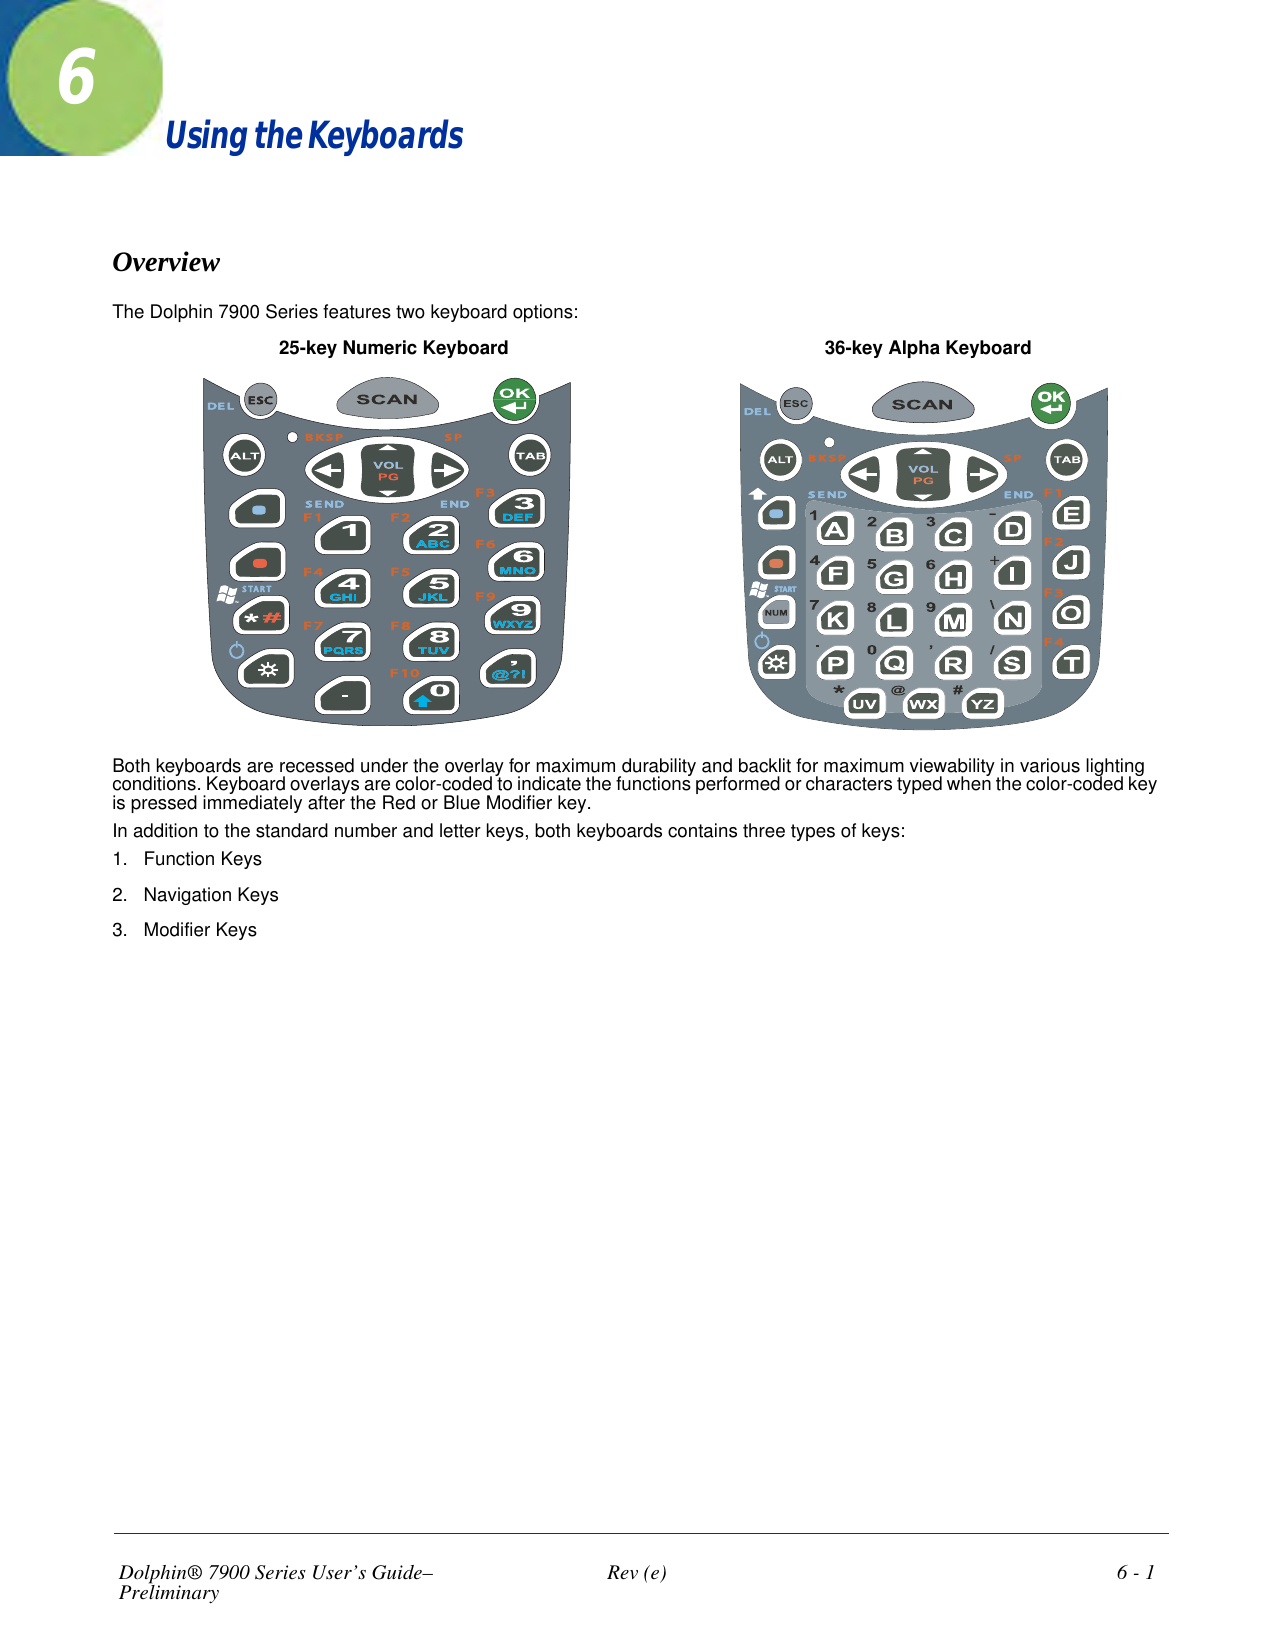 Dolphin® 7900 Series User’s Guide–Preliminary  Rev (e)  6 - 16Using the KeyboardsOverviewThe Dolphin 7900 Series features two keyboard options: EESCF 1F 2F 3F 4 F 5F 6F 7 F 8F 9F 10S T A R TB K S P S PS E ND E NDDE LSSTART+-B K S P S PS E ND E NDF 1F 2F 3F 4DE L25-key Numeric Keyboard 36-key Alpha KeyboardBoth keyboards are recessed under the overlay for maximum durability and backlit for maximum viewability in various lighting conditions. Keyboard overlays are color-coded to indicate the functions performed or characters typed when the color-coded key is pressed immediately after the Red or Blue Modifier key. In addition to the standard number and letter keys, both keyboards contains three types of keys:1. Function Keys2. Navigation Keys 3. Modifier Keys